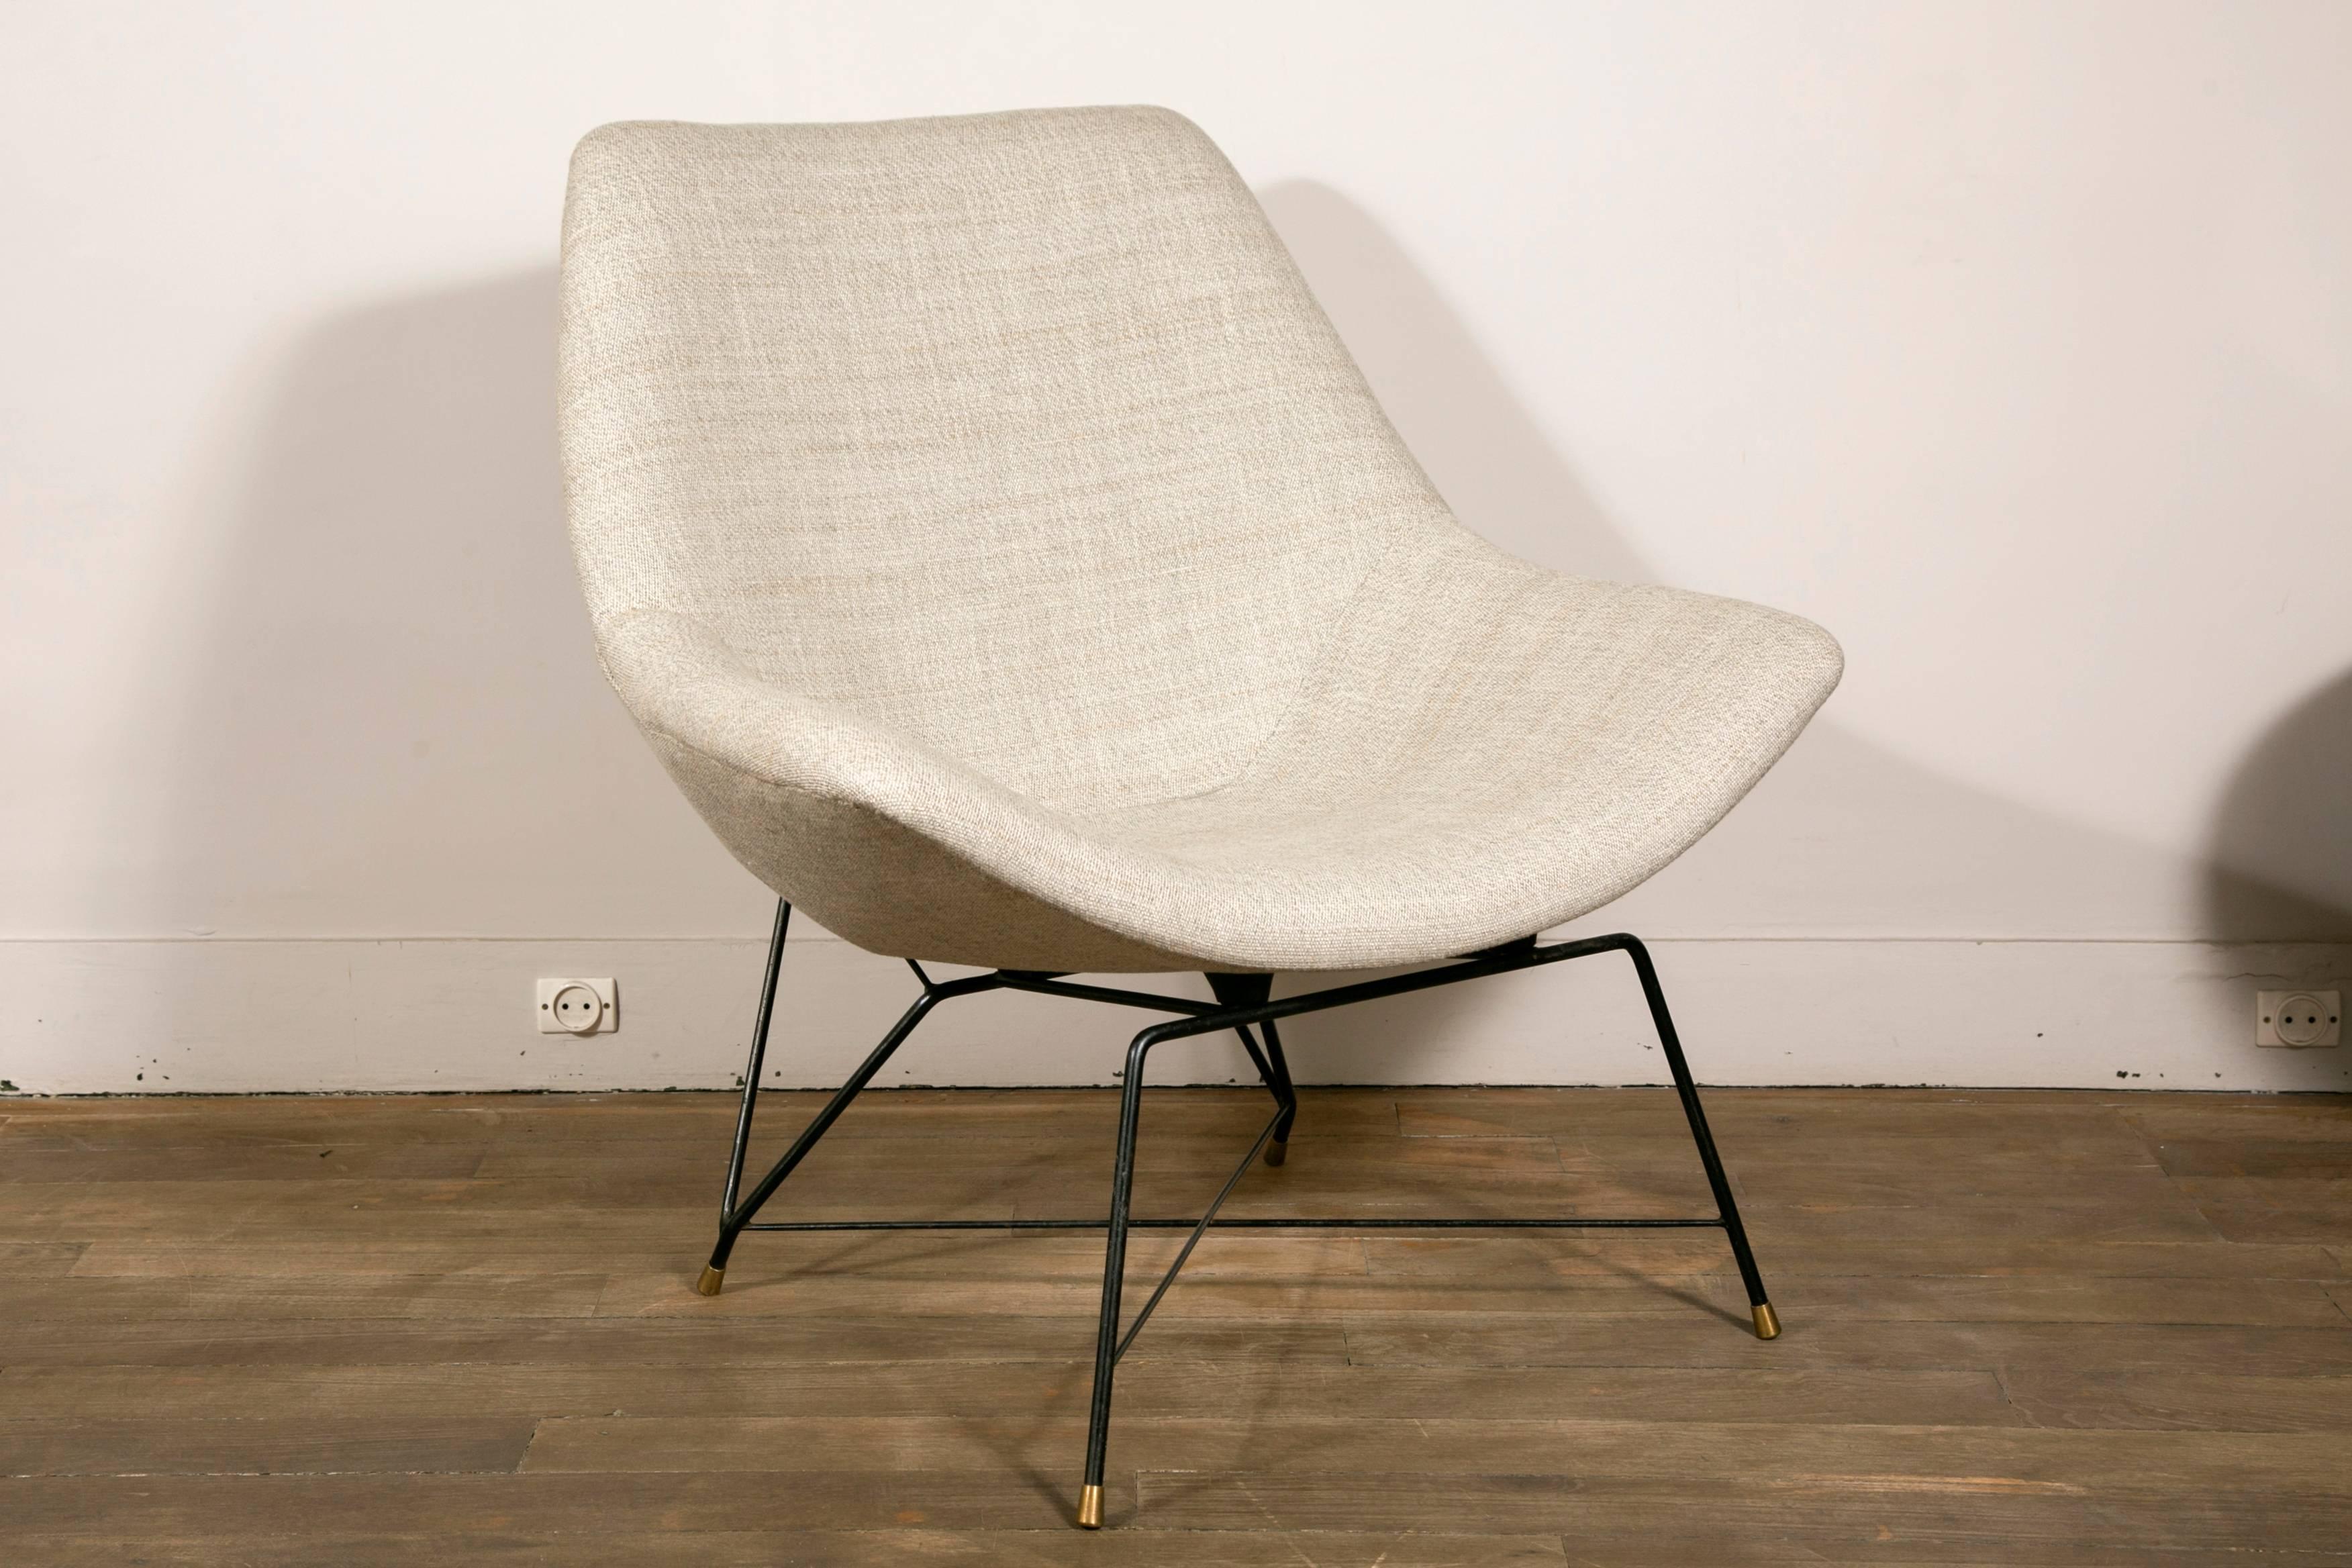 Pair of Kosmos lounge chairs, metal base, brass details and textile.
Designed by Augusto Bozzi edited by Saporiti
Italy, circa 1956

Measure: Height 33.46 in.
Width 33.46 in.
Depth 27.56 in.
Seat heigtht 13.77 in.